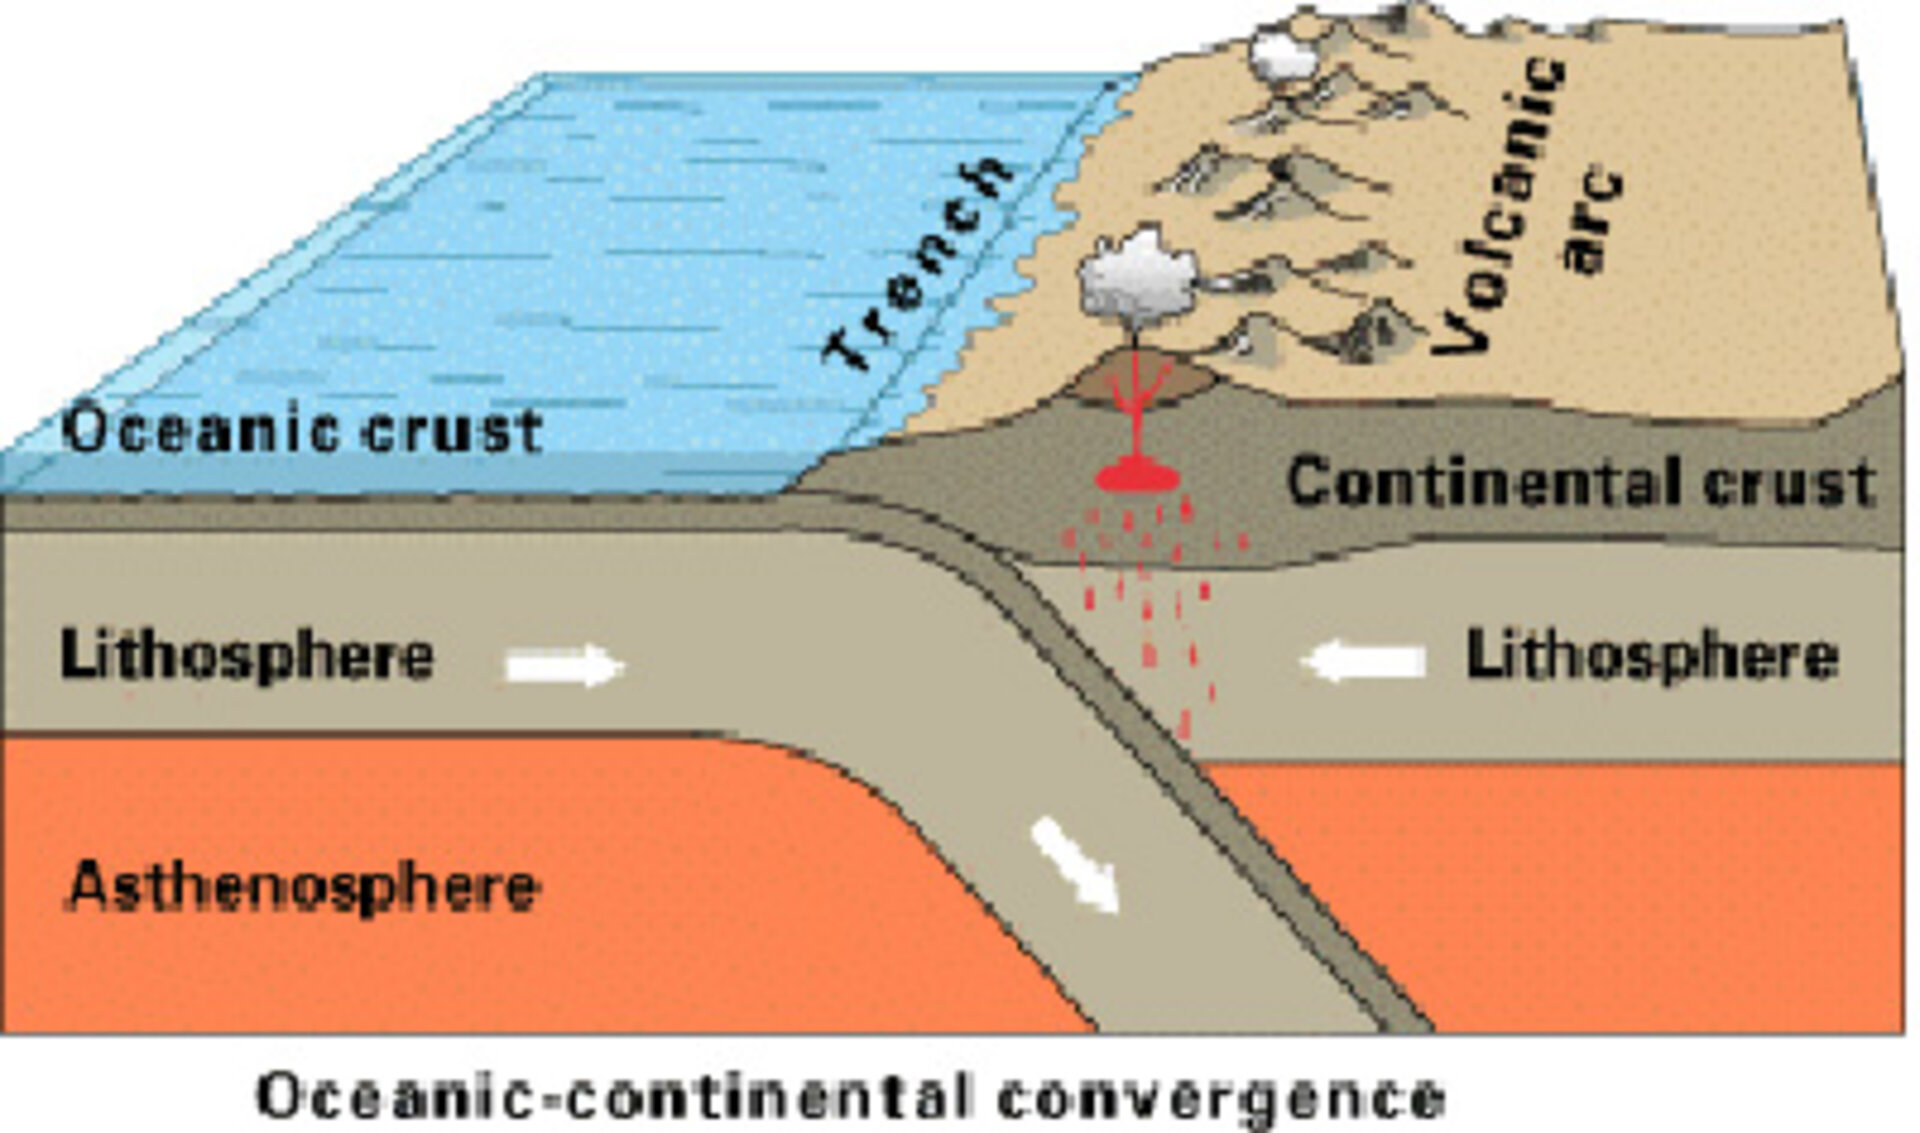 Ocean Continent Convergence